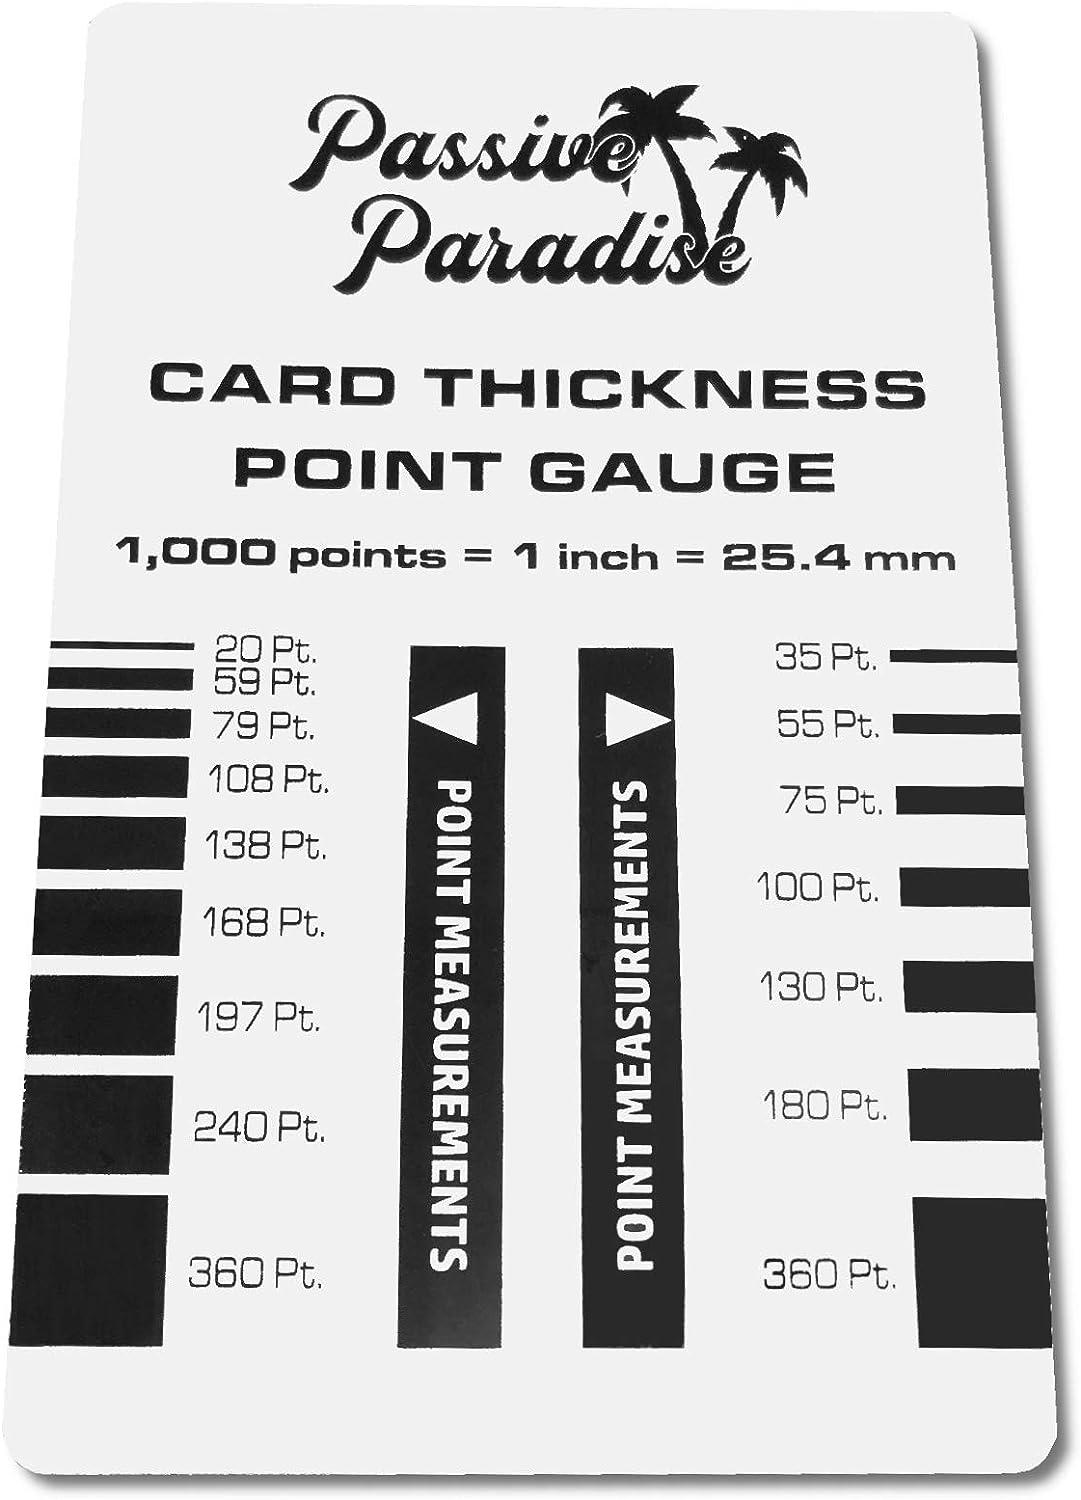 Passive Paradise Card Thickness Point Gauge Tool - Made for